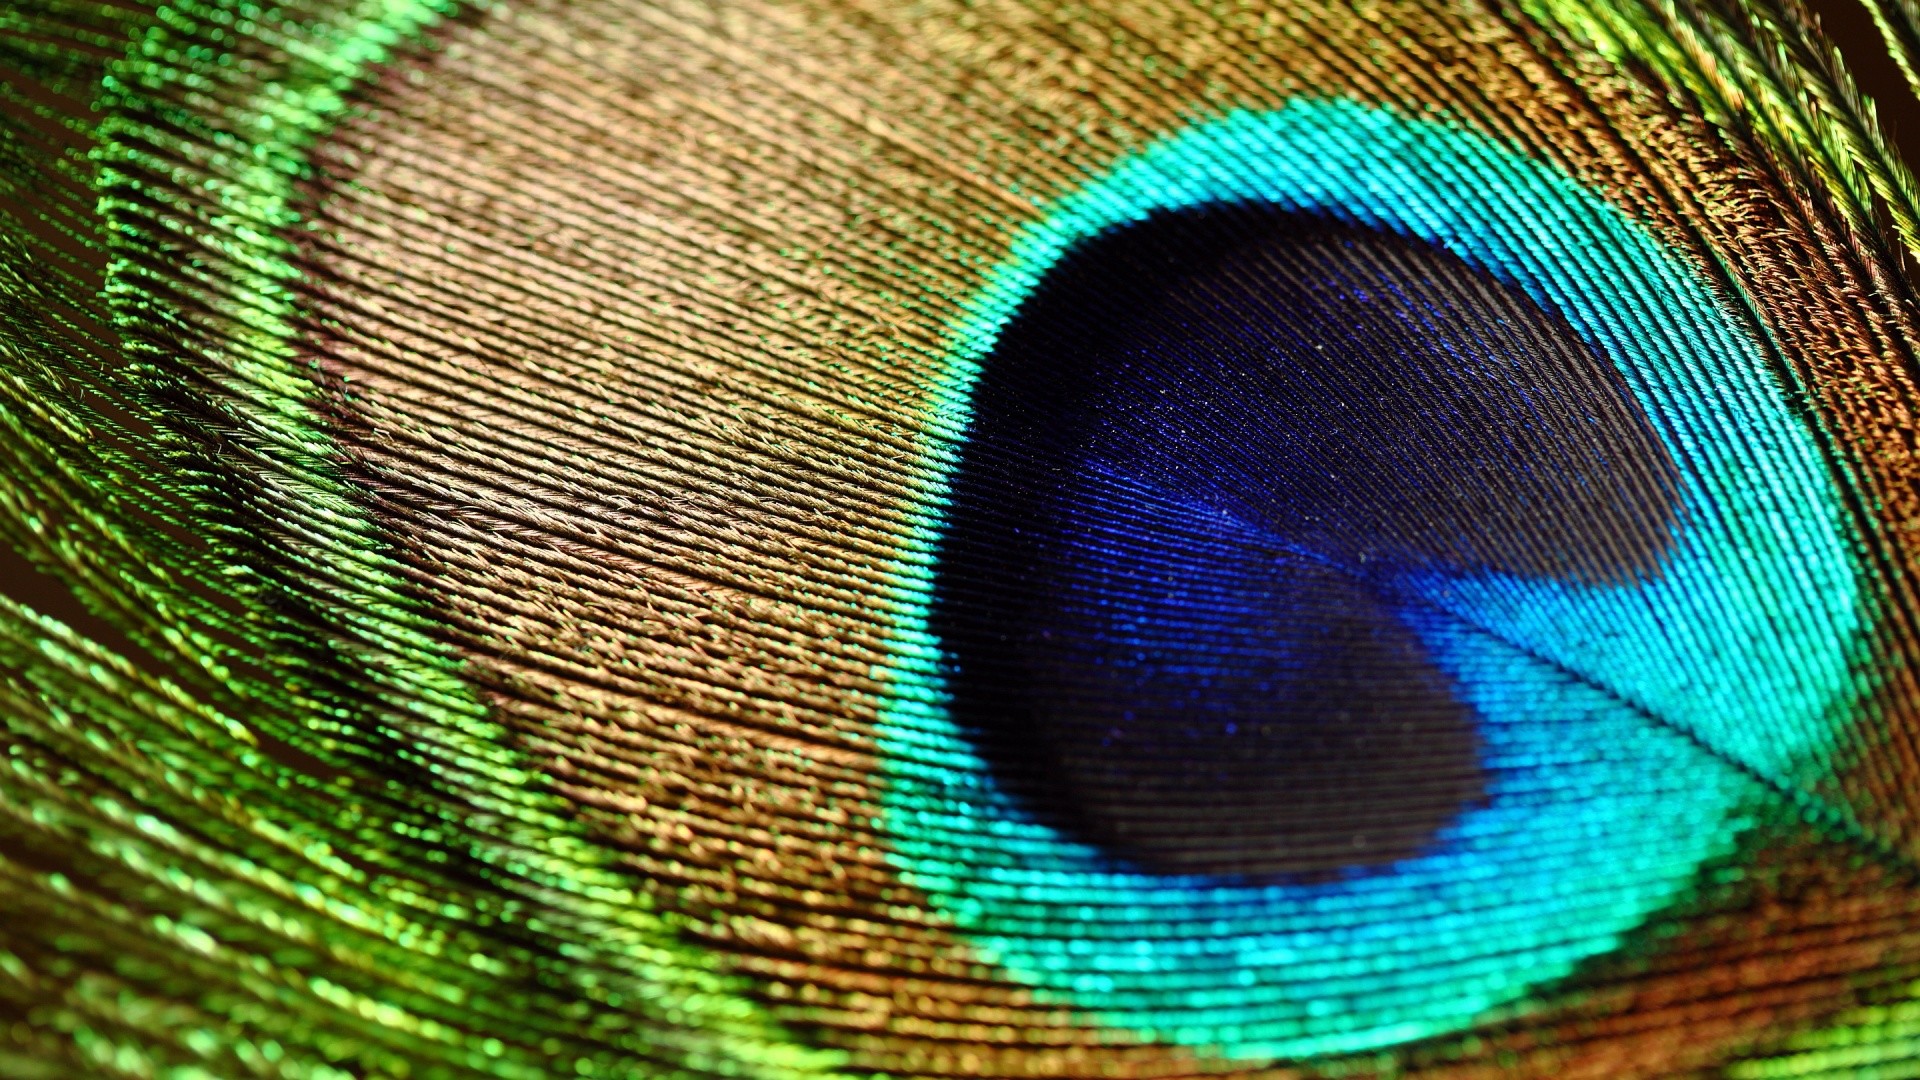 1920x1080 Peacock Feathers HQ Pics